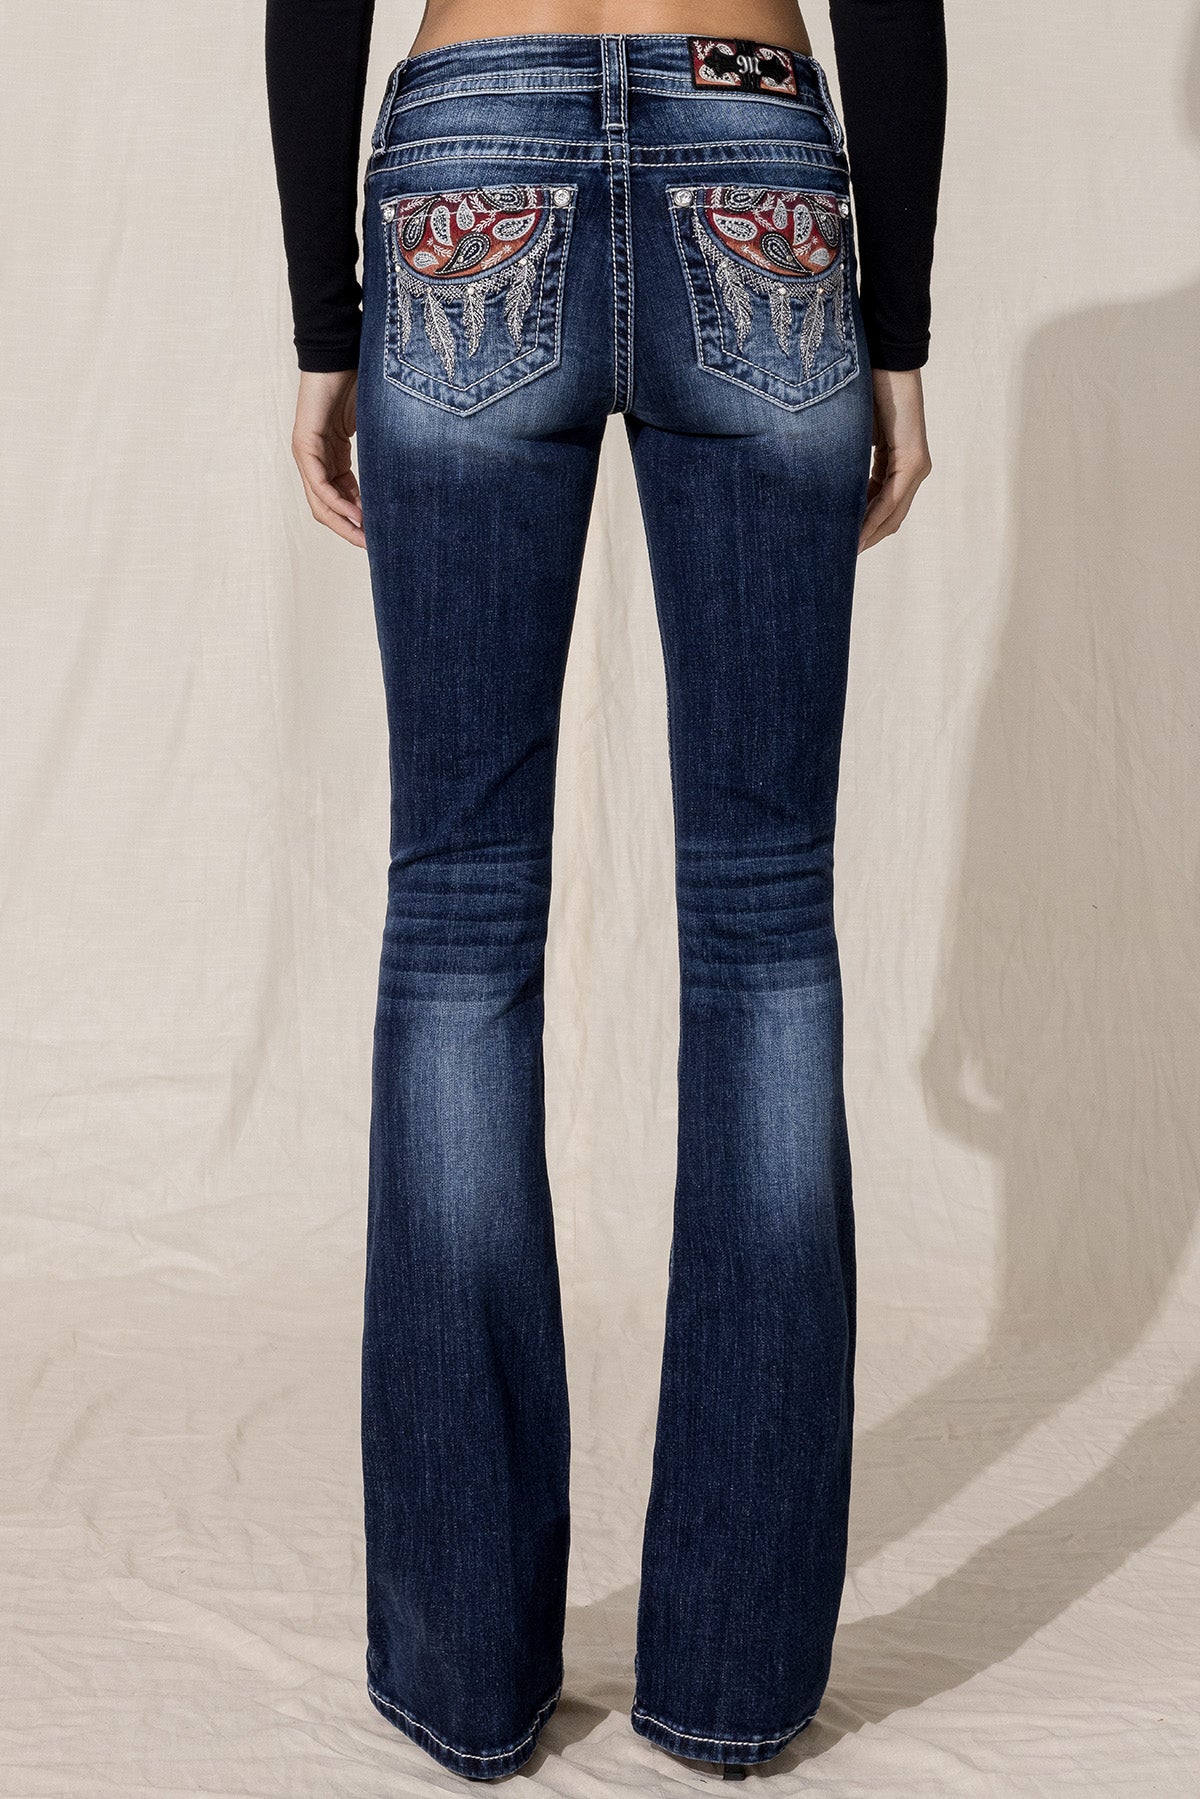 Paisley Dreaming Bootcut Jean | | Blue | Only Miss $101.15 Me